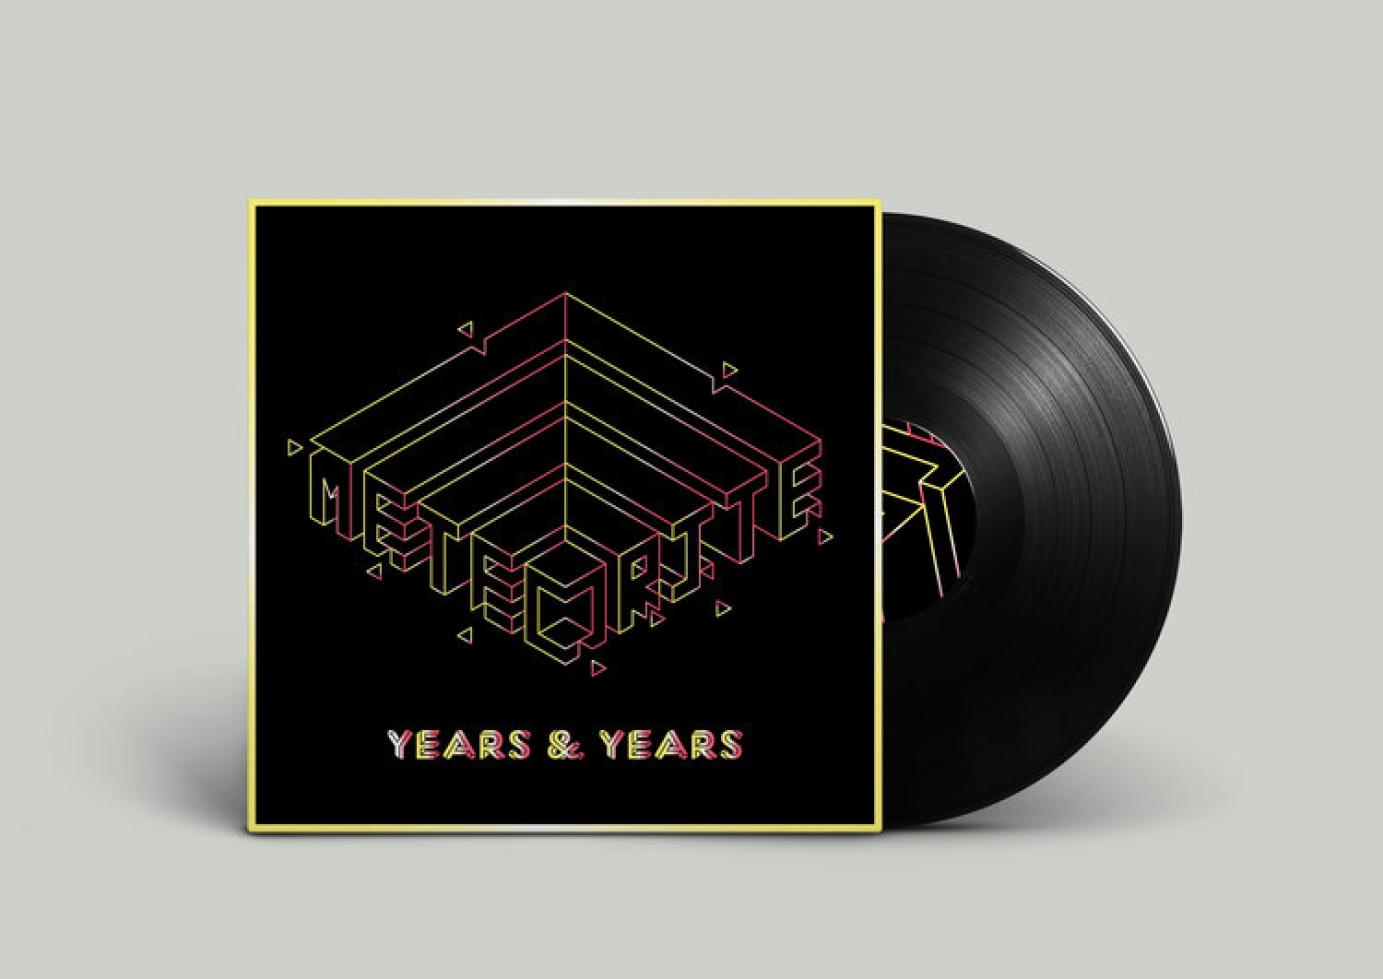 Artwork for Years & Years by Guy Pittard